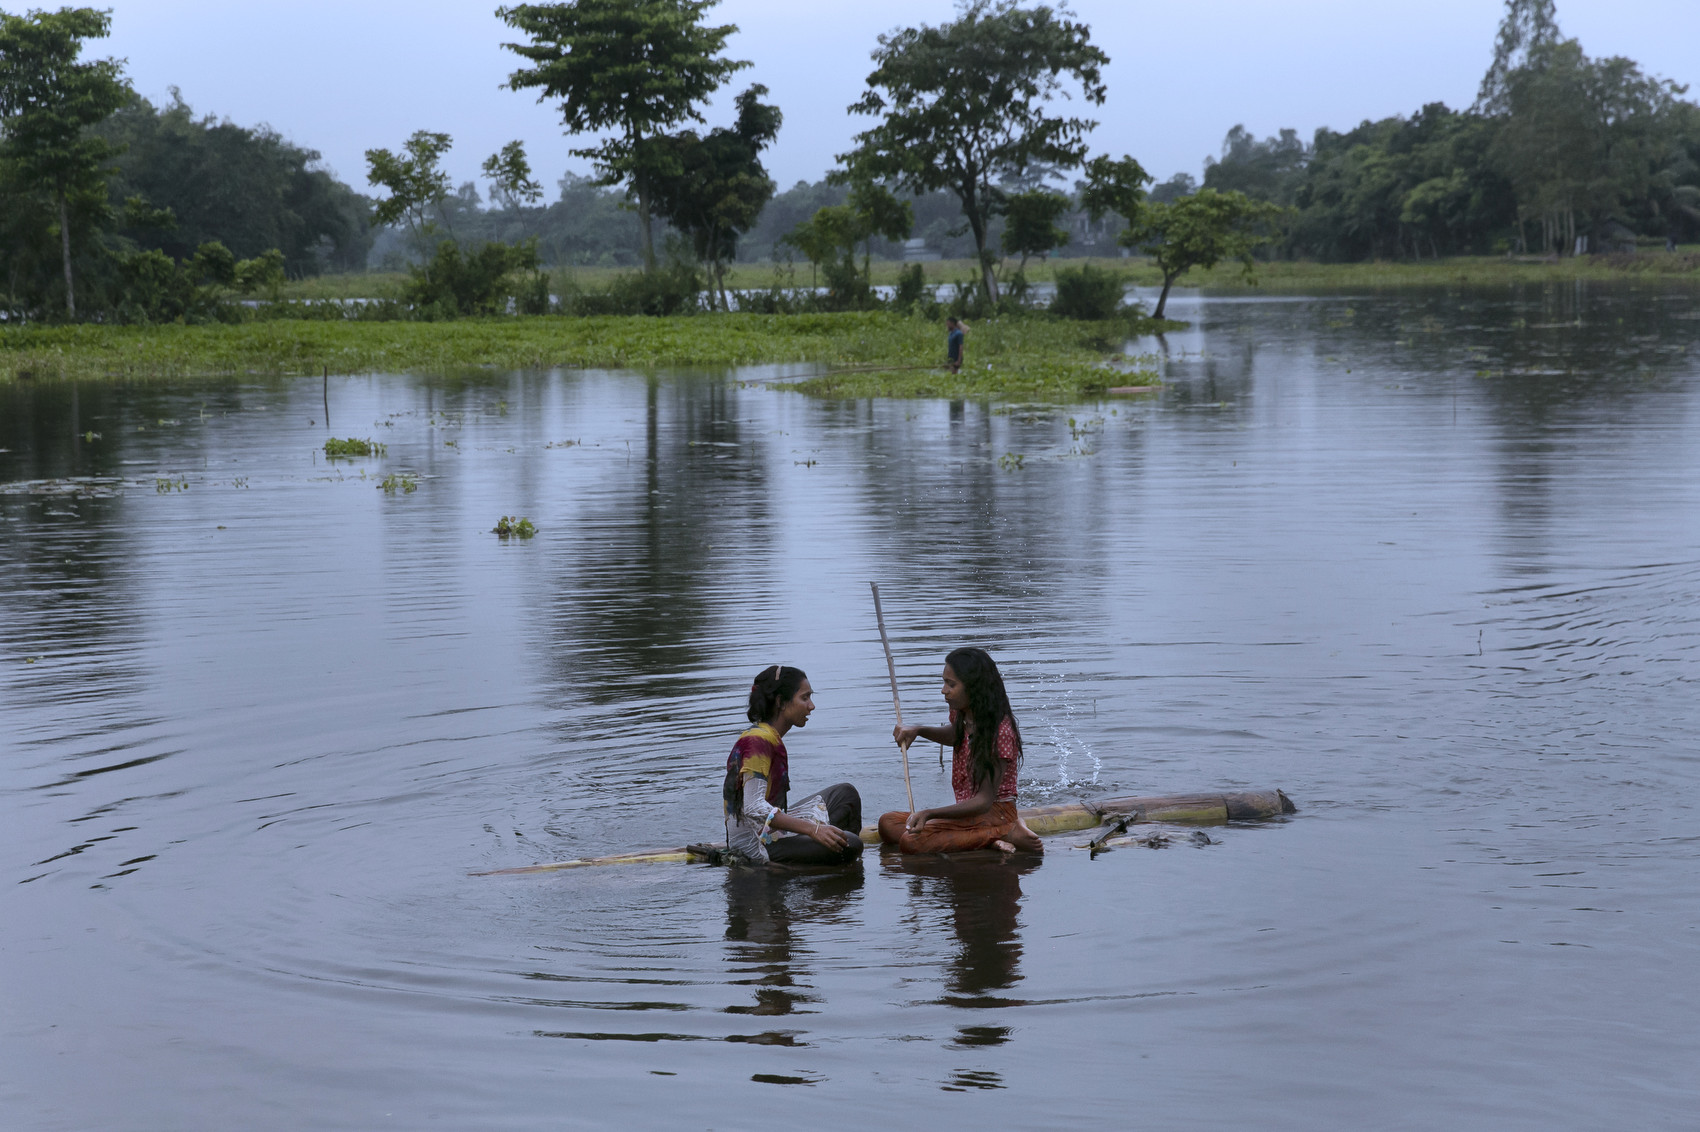 SHERPUR, BANGLADESH - SEPTEMBER 21: Alo and Habiba (L-R) sit on a makeshift boat in a lake by their village on September 21, 2021 in Sherpur, Bangladesh. In South Asia, “hijras” are identified as a category of people who are assigned as male at birth but develop a feminine gender identity. They are generally outcasted from mainstream society, and have no other way of earning money other than harassing and extorting people for money. A new government initiative aims to change that. Recently, 40 Hijra were given homes, grants, loans, livestock, and livelihood training in an effort to make them self sufficient. (Photo by Allison Joyce/Getty Images)